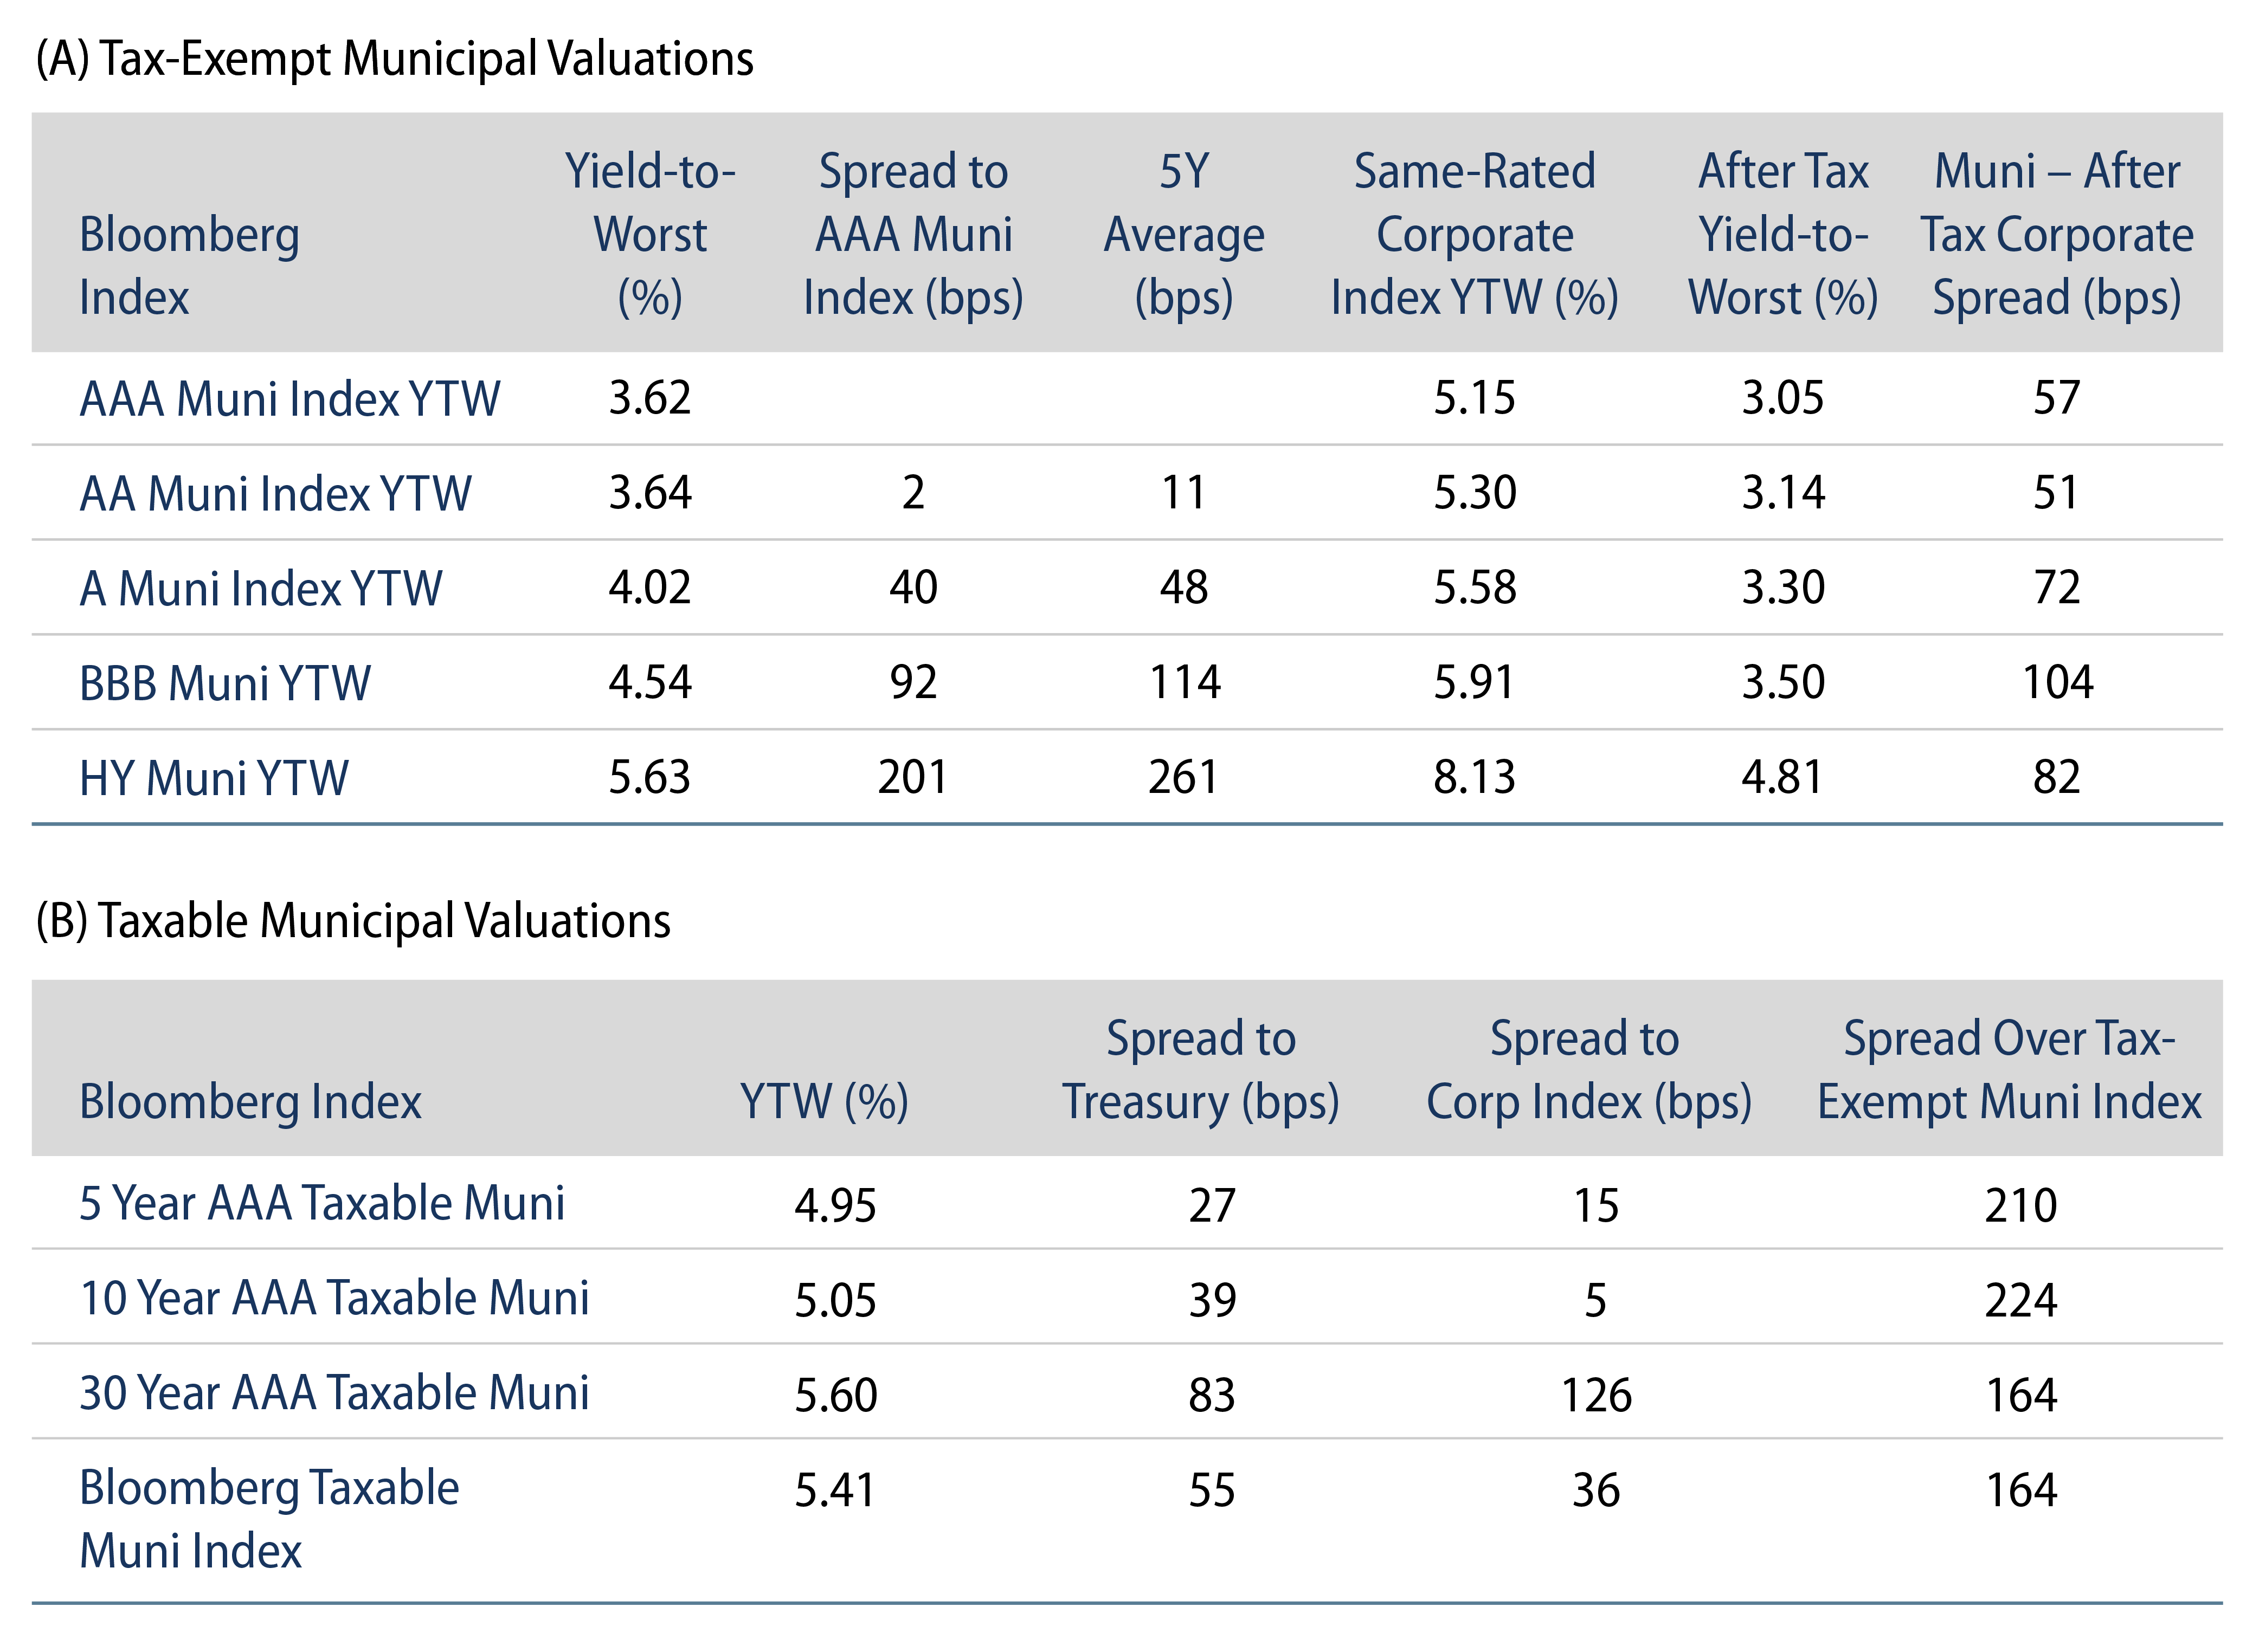 Tax-Exempt and Taxable Muni Valuations